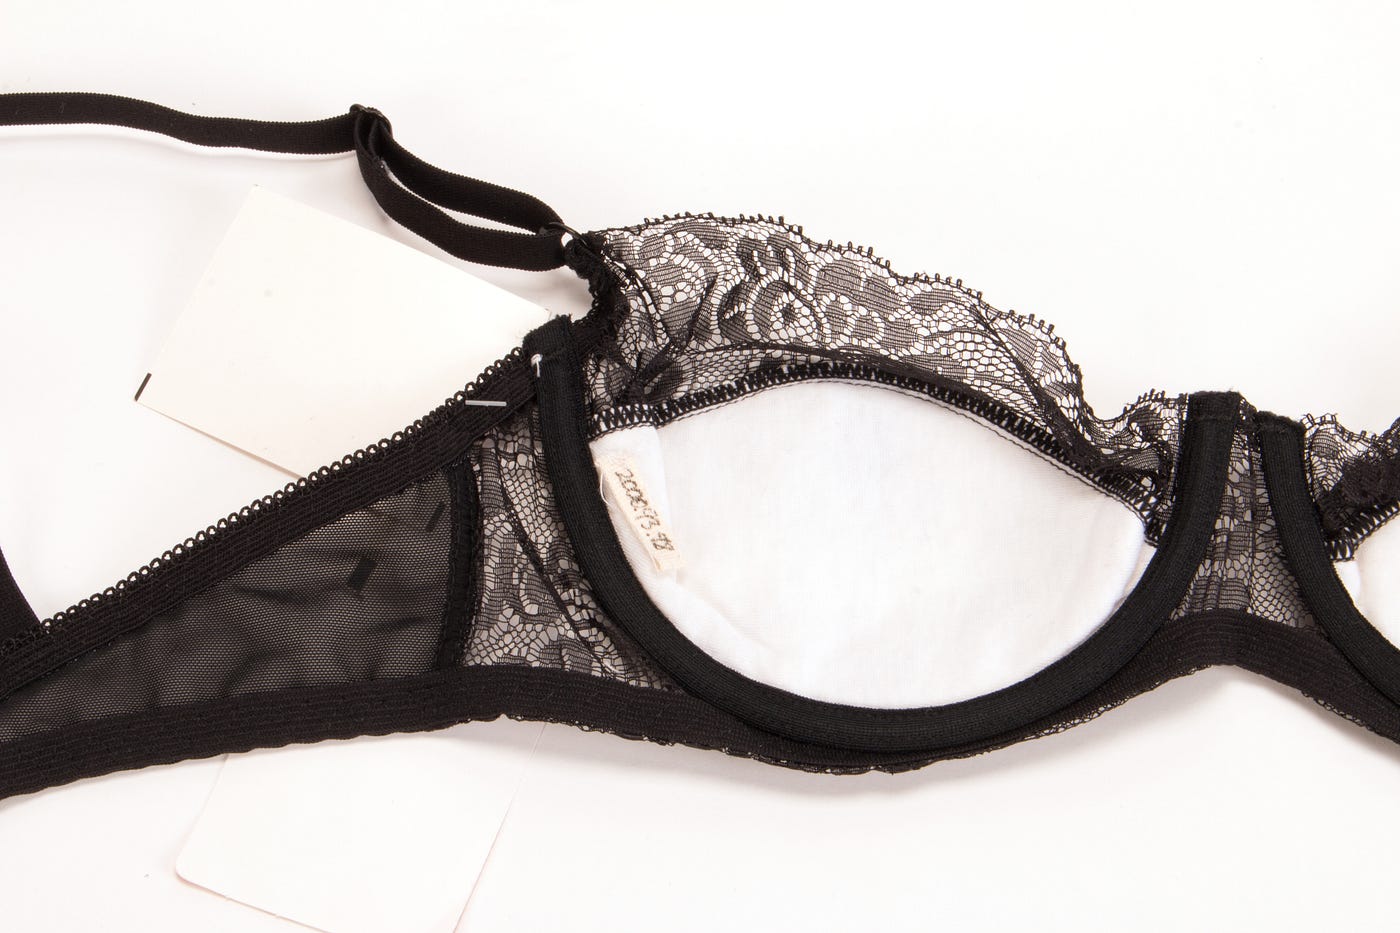 Revolutionize Your Lingerie with 3D Printed Bras, by 3Ddeal.com